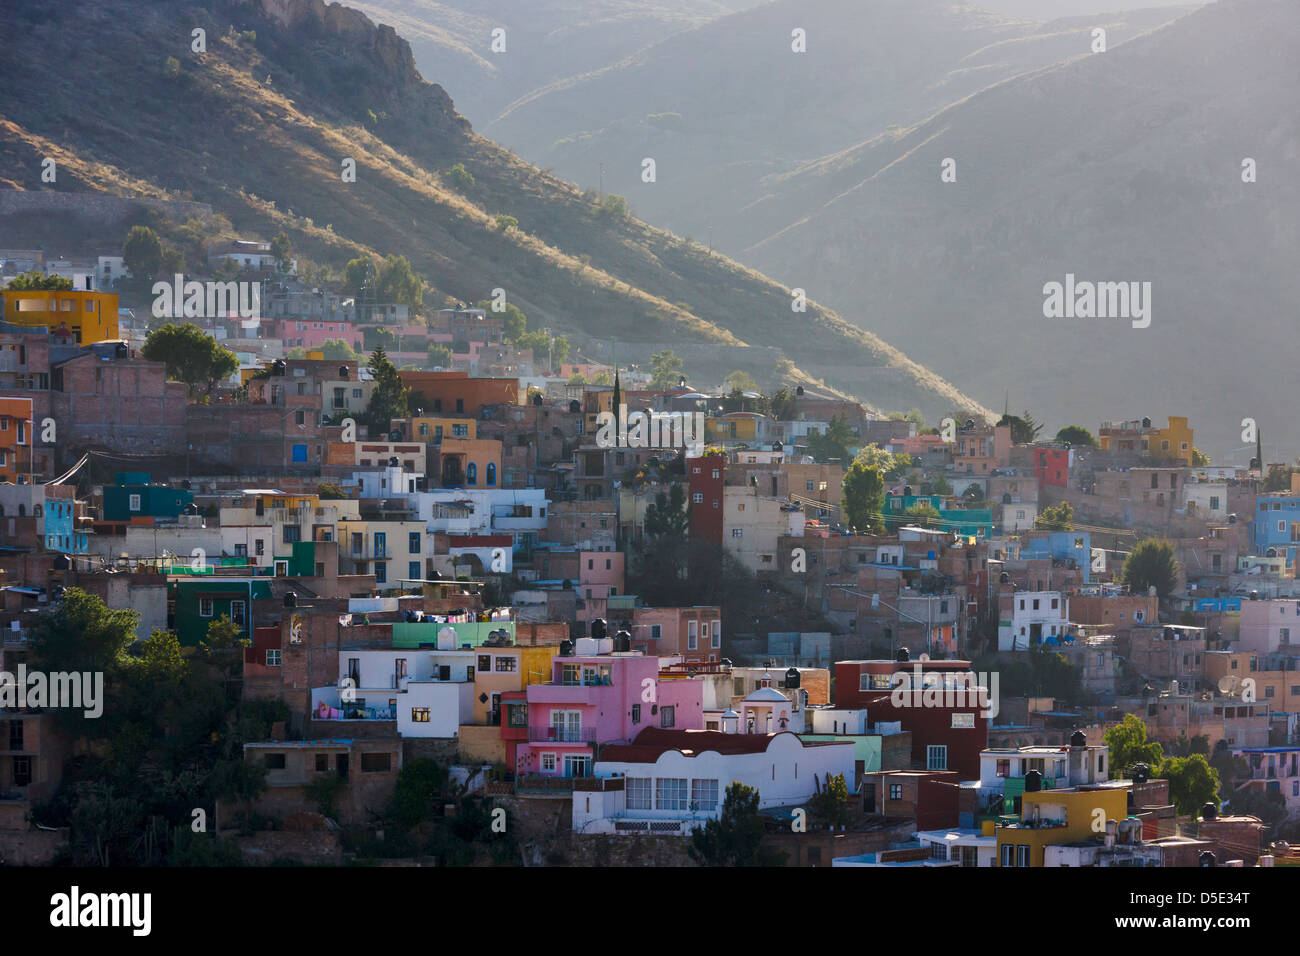 Colonial houses on the hillside, Guanajuato, Mexico Stock Photo